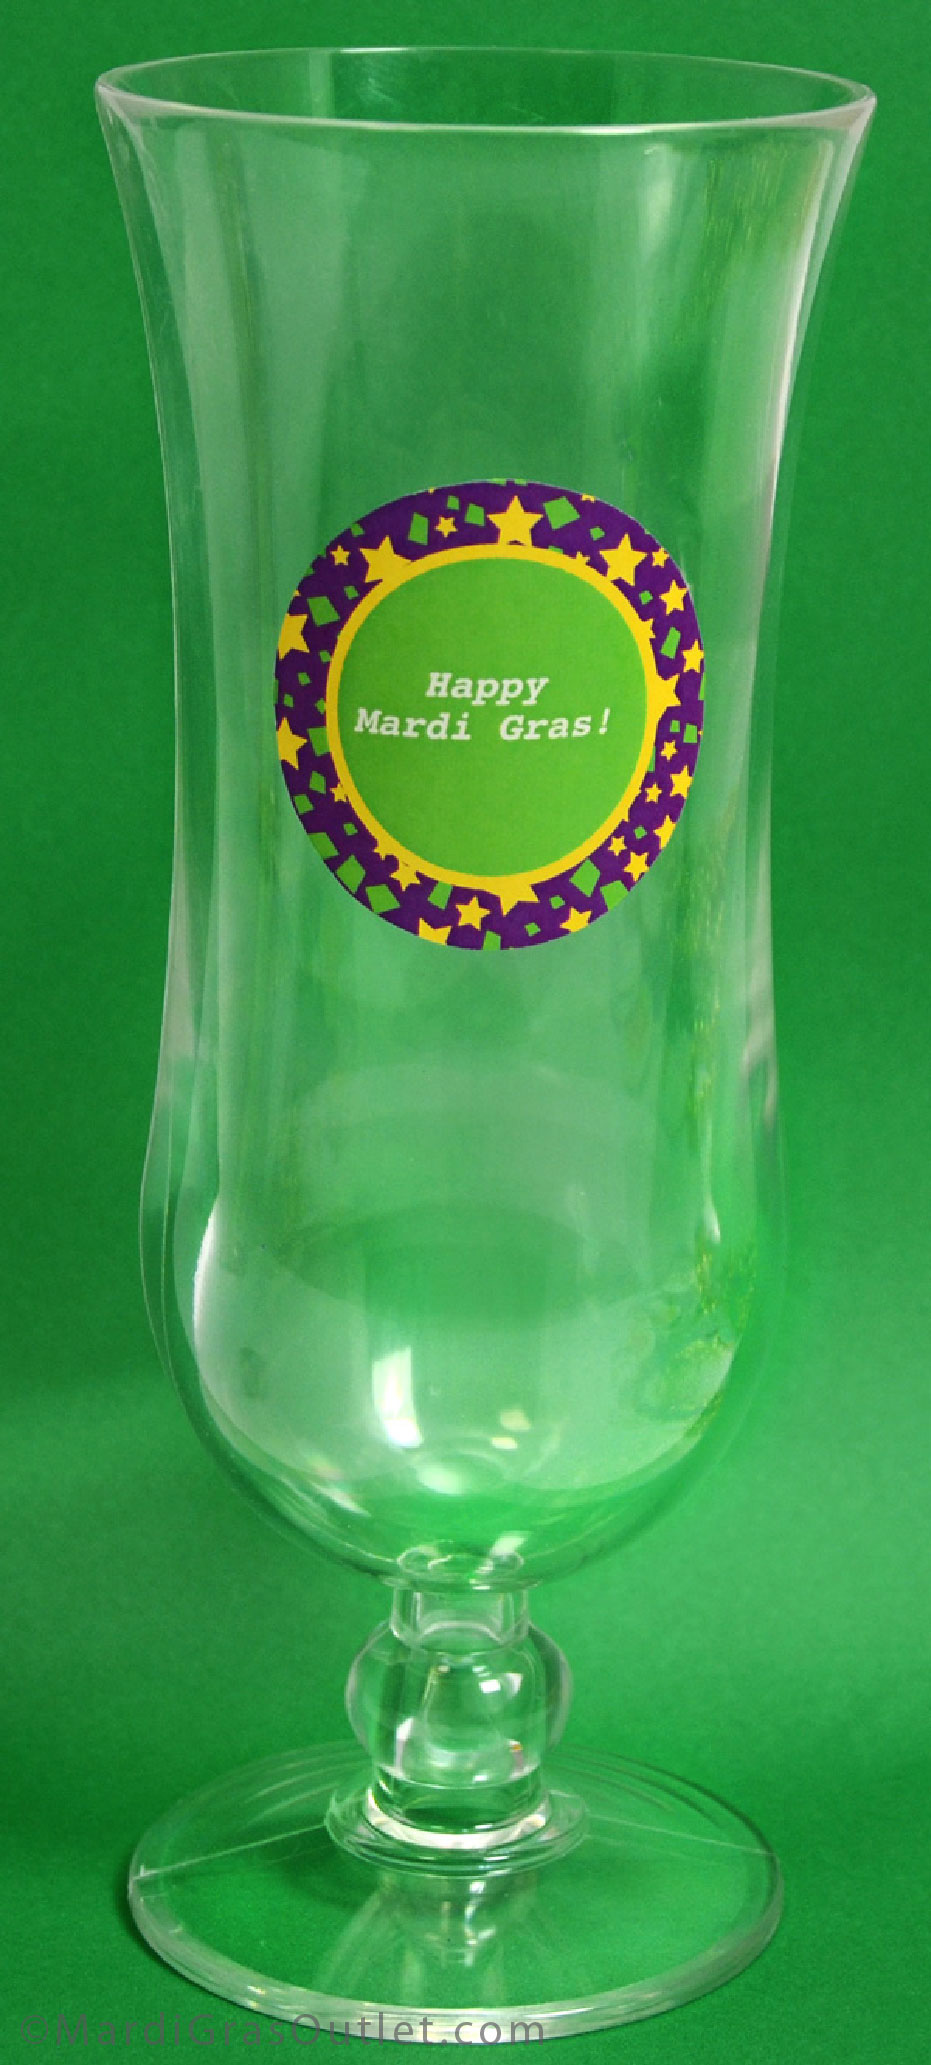 Party Ideas by Mardi Gras Outlet: Creative Uses for Mardi Gras Stickers